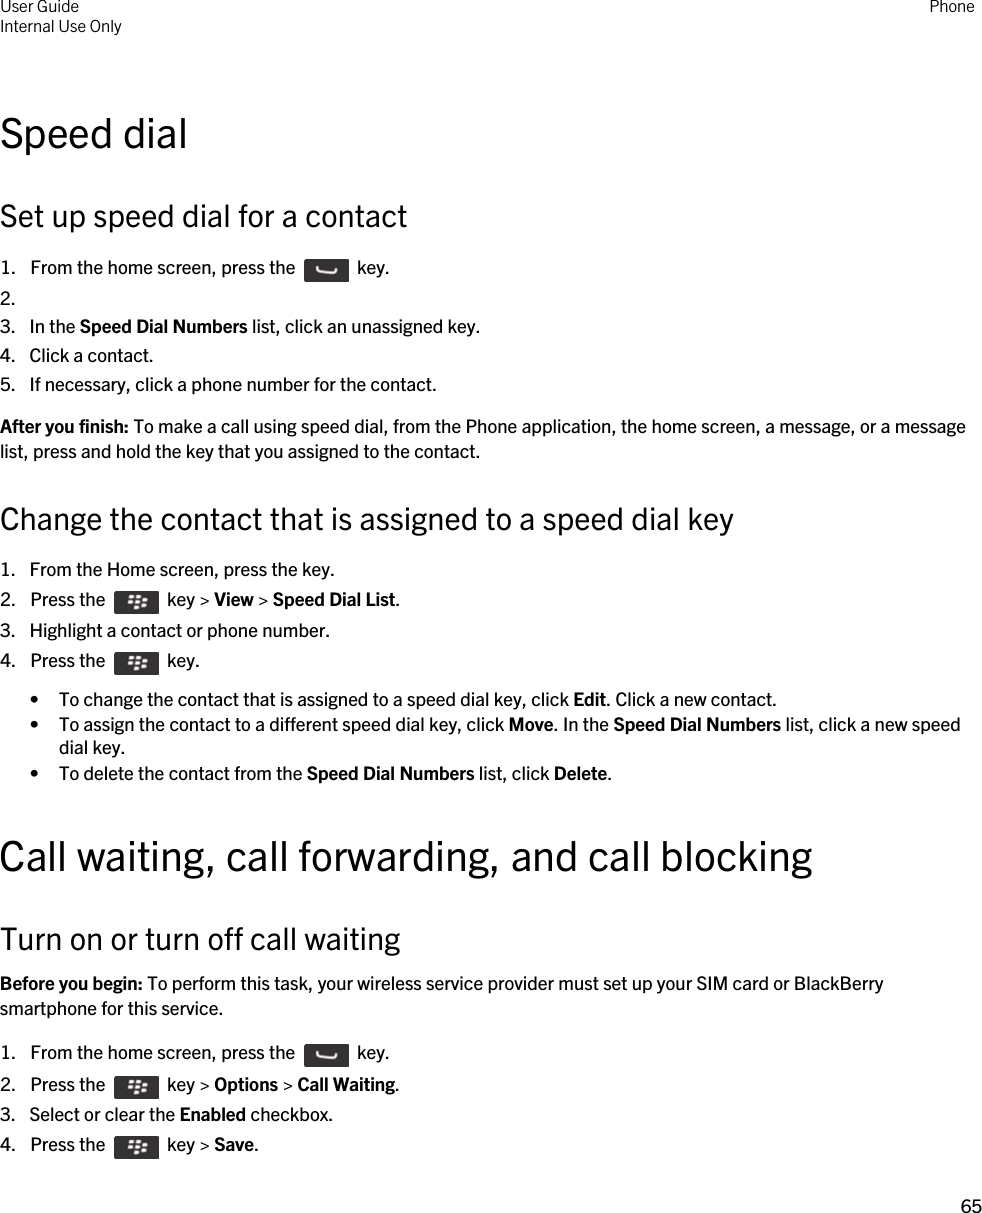 Speed dialSet up speed dial for a contact1.  From the home screen, press the    key. 2.3. In the Speed Dial Numbers list, click an unassigned key.4. Click a contact.5. If necessary, click a phone number for the contact.After you finish: To make a call using speed dial, from the Phone application, the home screen, a message, or a message list, press and hold the key that you assigned to the contact.Change the contact that is assigned to a speed dial key1. From the Home screen, press the key.2.  Press the    key &gt; View &gt; Speed Dial List. 3. Highlight a contact or phone number.4.  Press the    key. • To change the contact that is assigned to a speed dial key, click Edit. Click a new contact.• To assign the contact to a different speed dial key, click Move. In the Speed Dial Numbers list, click a new speed dial key.• To delete the contact from the Speed Dial Numbers list, click Delete.Call waiting, call forwarding, and call blockingTurn on or turn off call waitingBefore you begin: To perform this task, your wireless service provider must set up your SIM card or BlackBerry smartphone for this service.1.  From the home screen, press the    key. 2.  Press the    key &gt; Options &gt; Call Waiting.3. Select or clear the Enabled checkbox.4.  Press the    key &gt; Save. User GuideInternal Use Only Phone65 